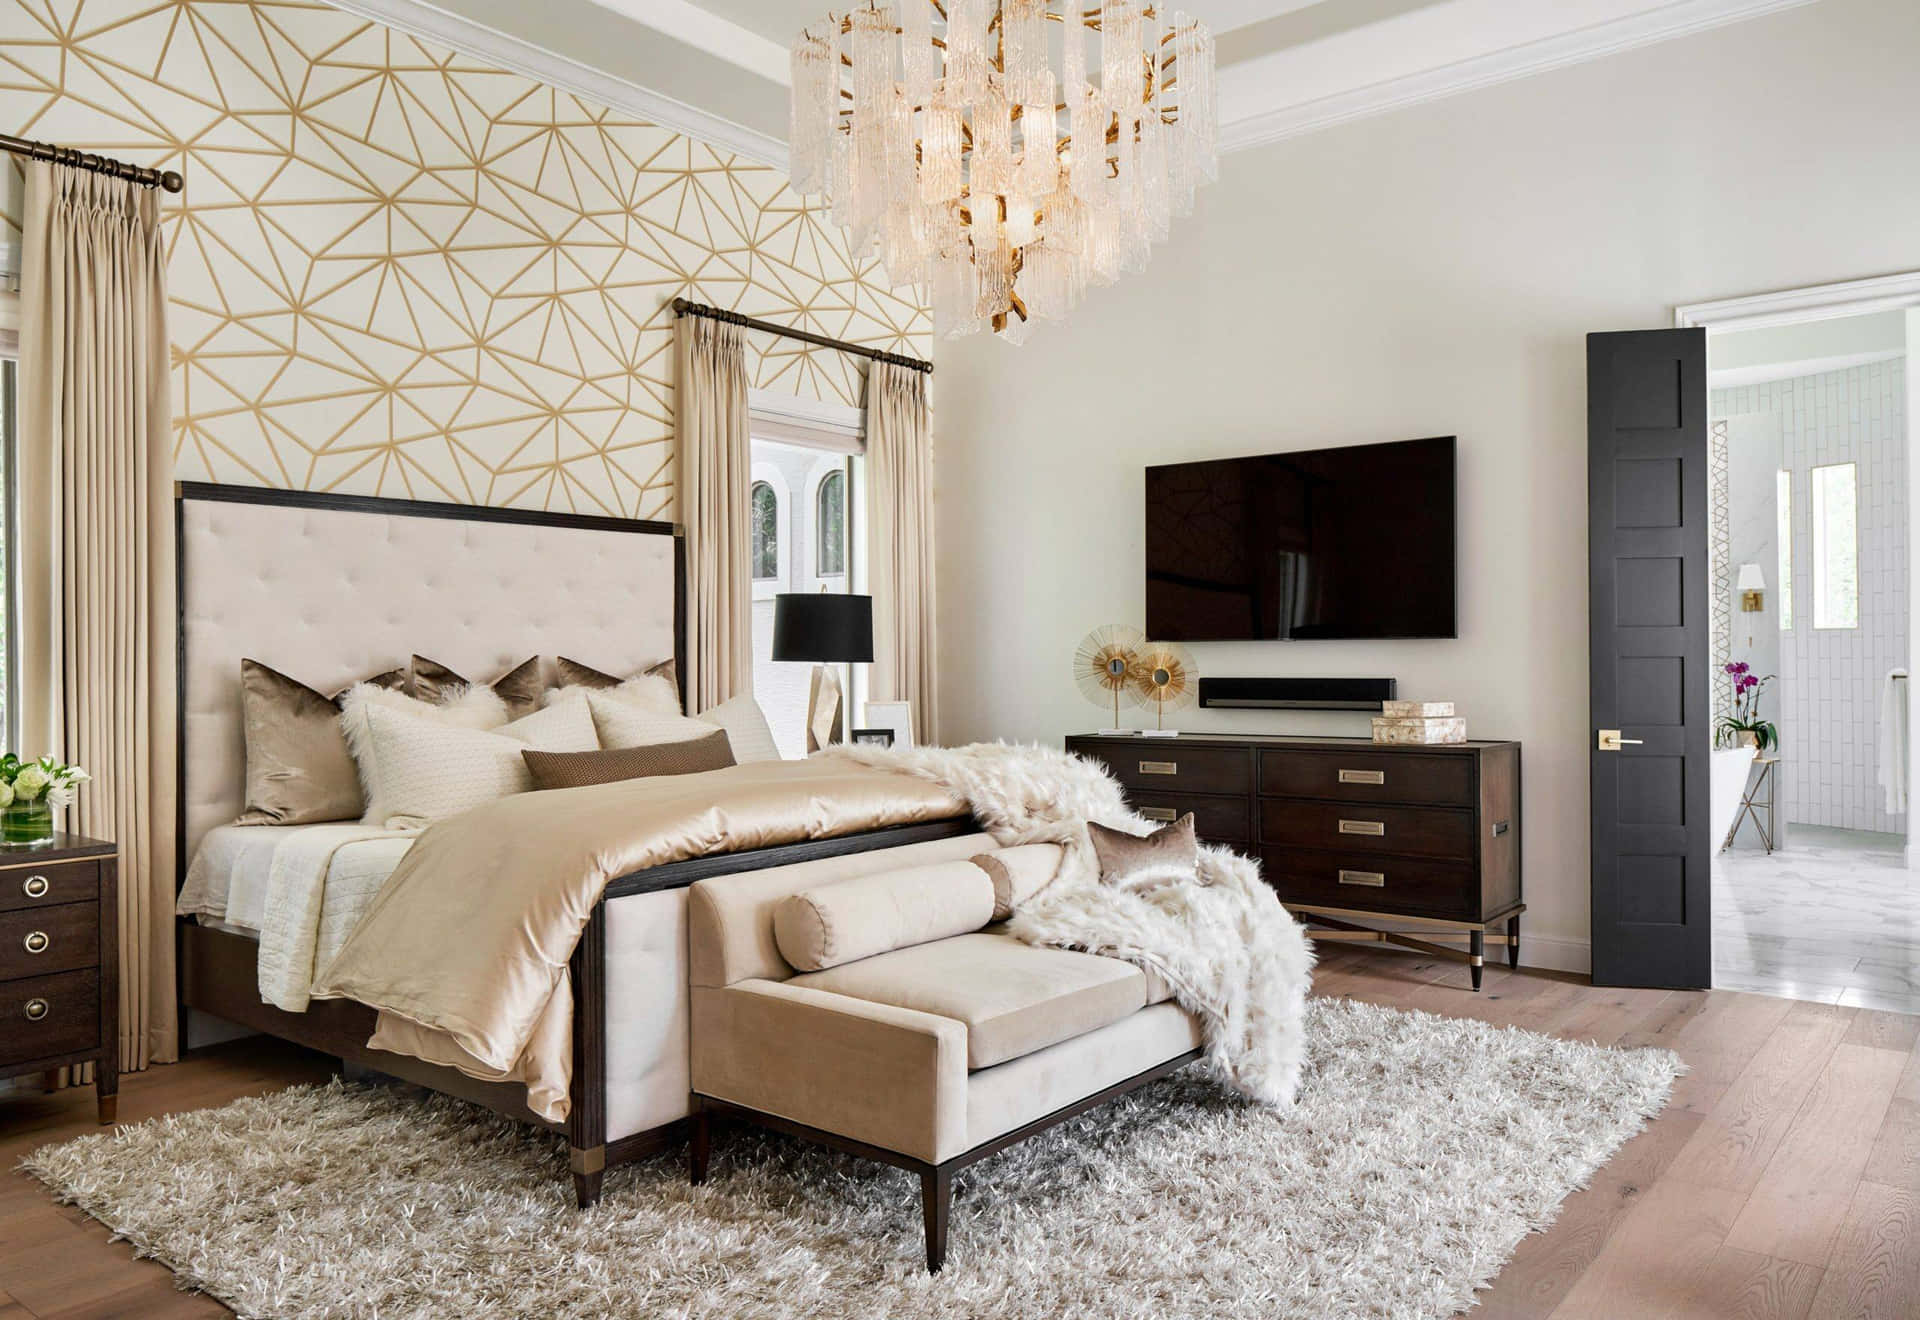 Luxurious Bed Grand Chandeliers